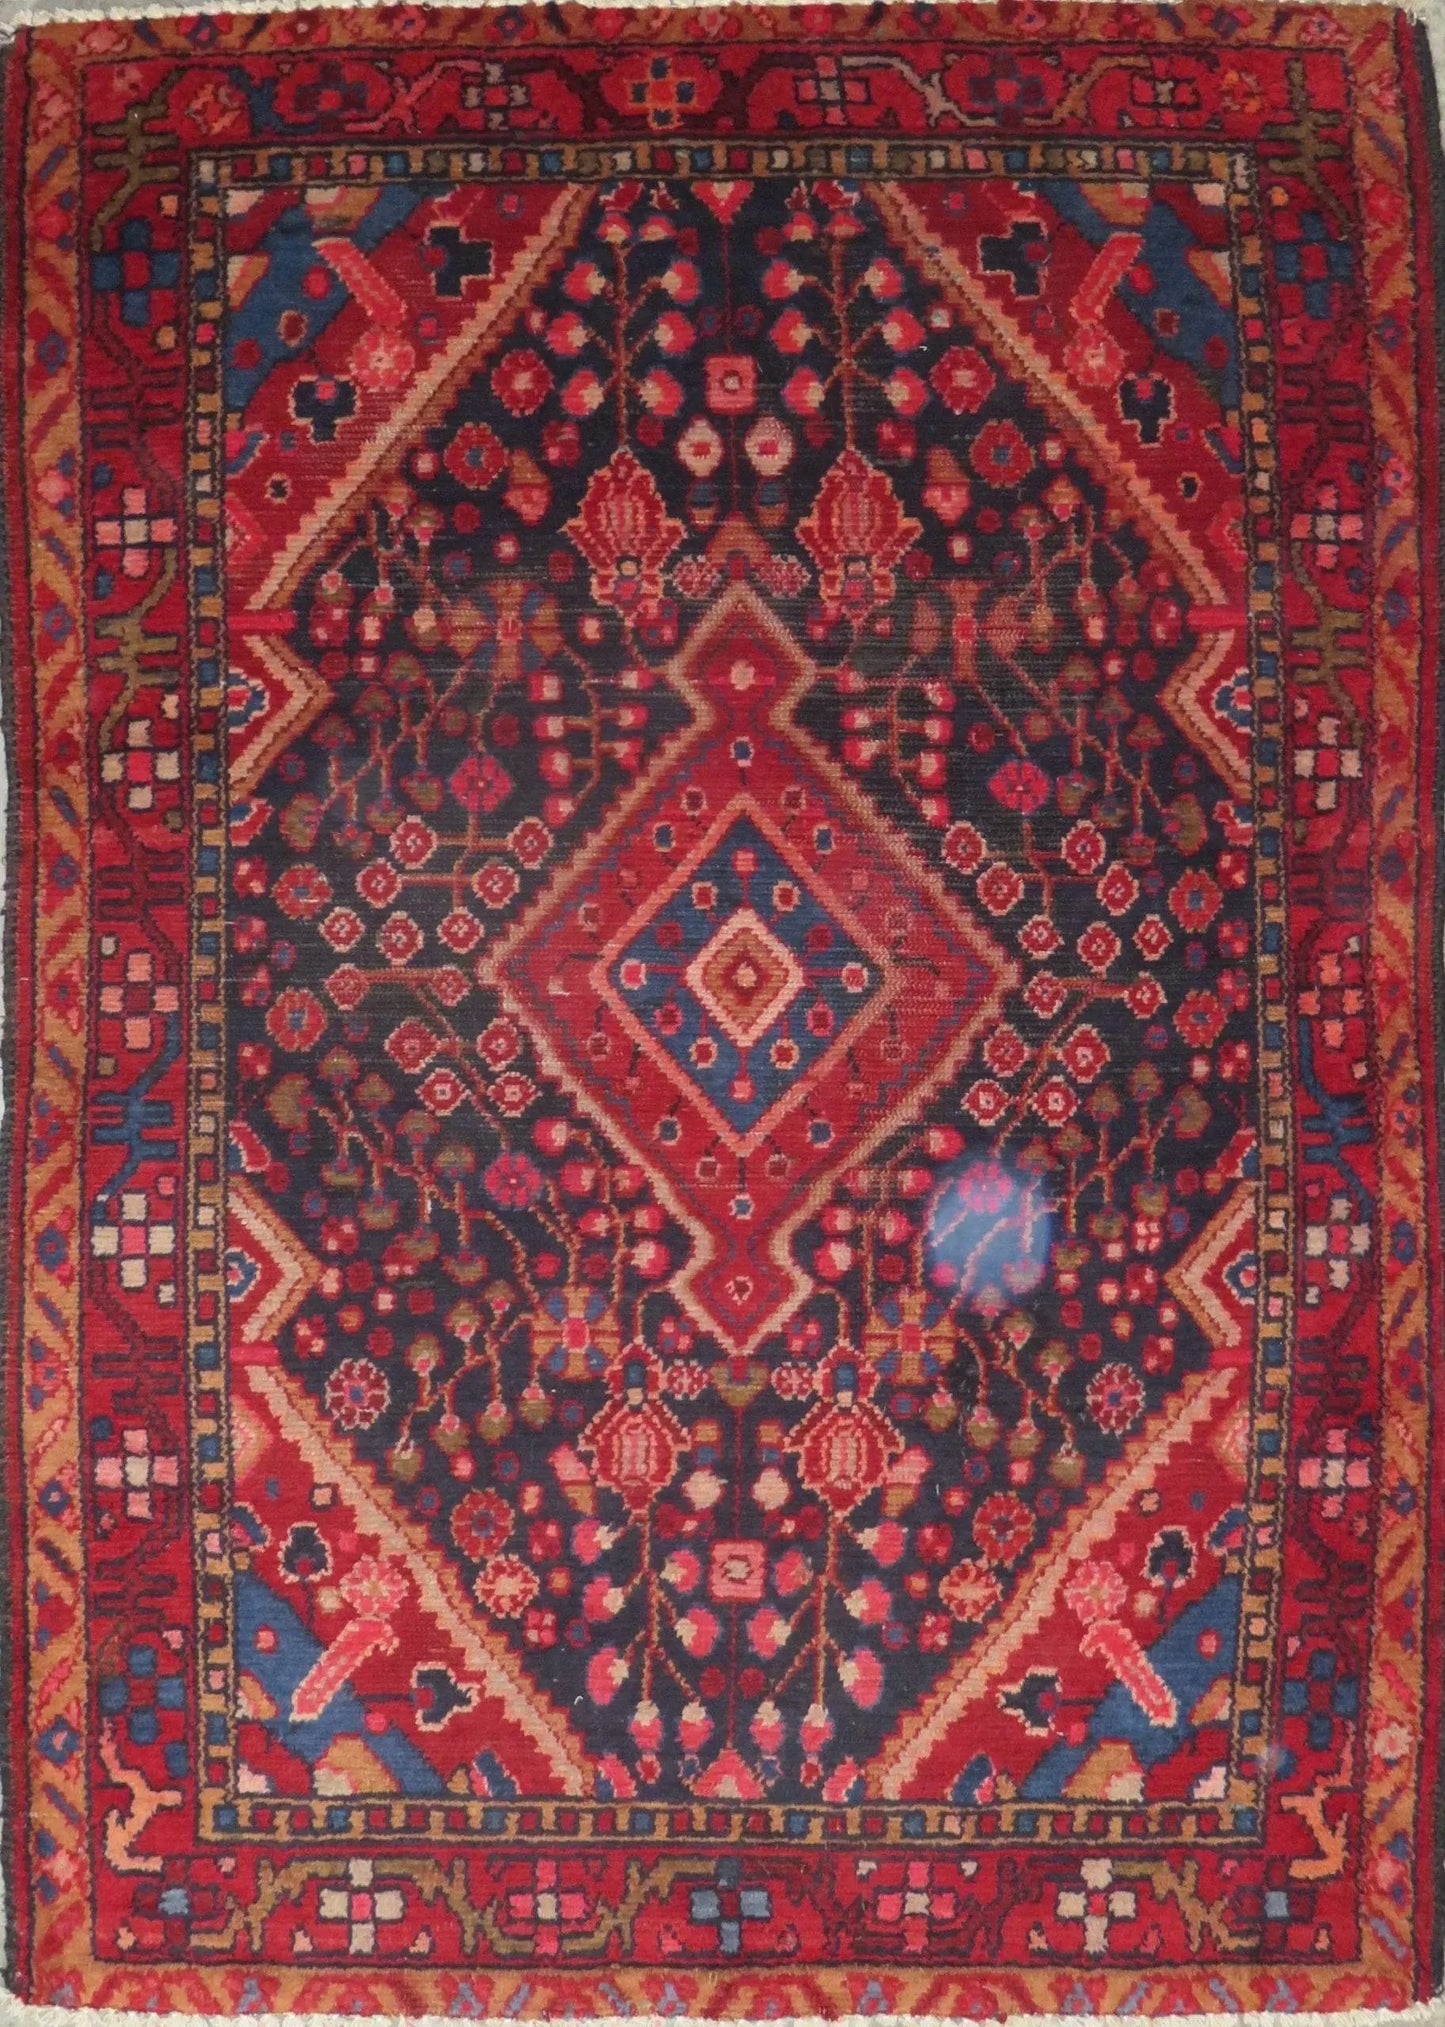 Hand-Knotted Vintage Rug 5'6" x 3'9"